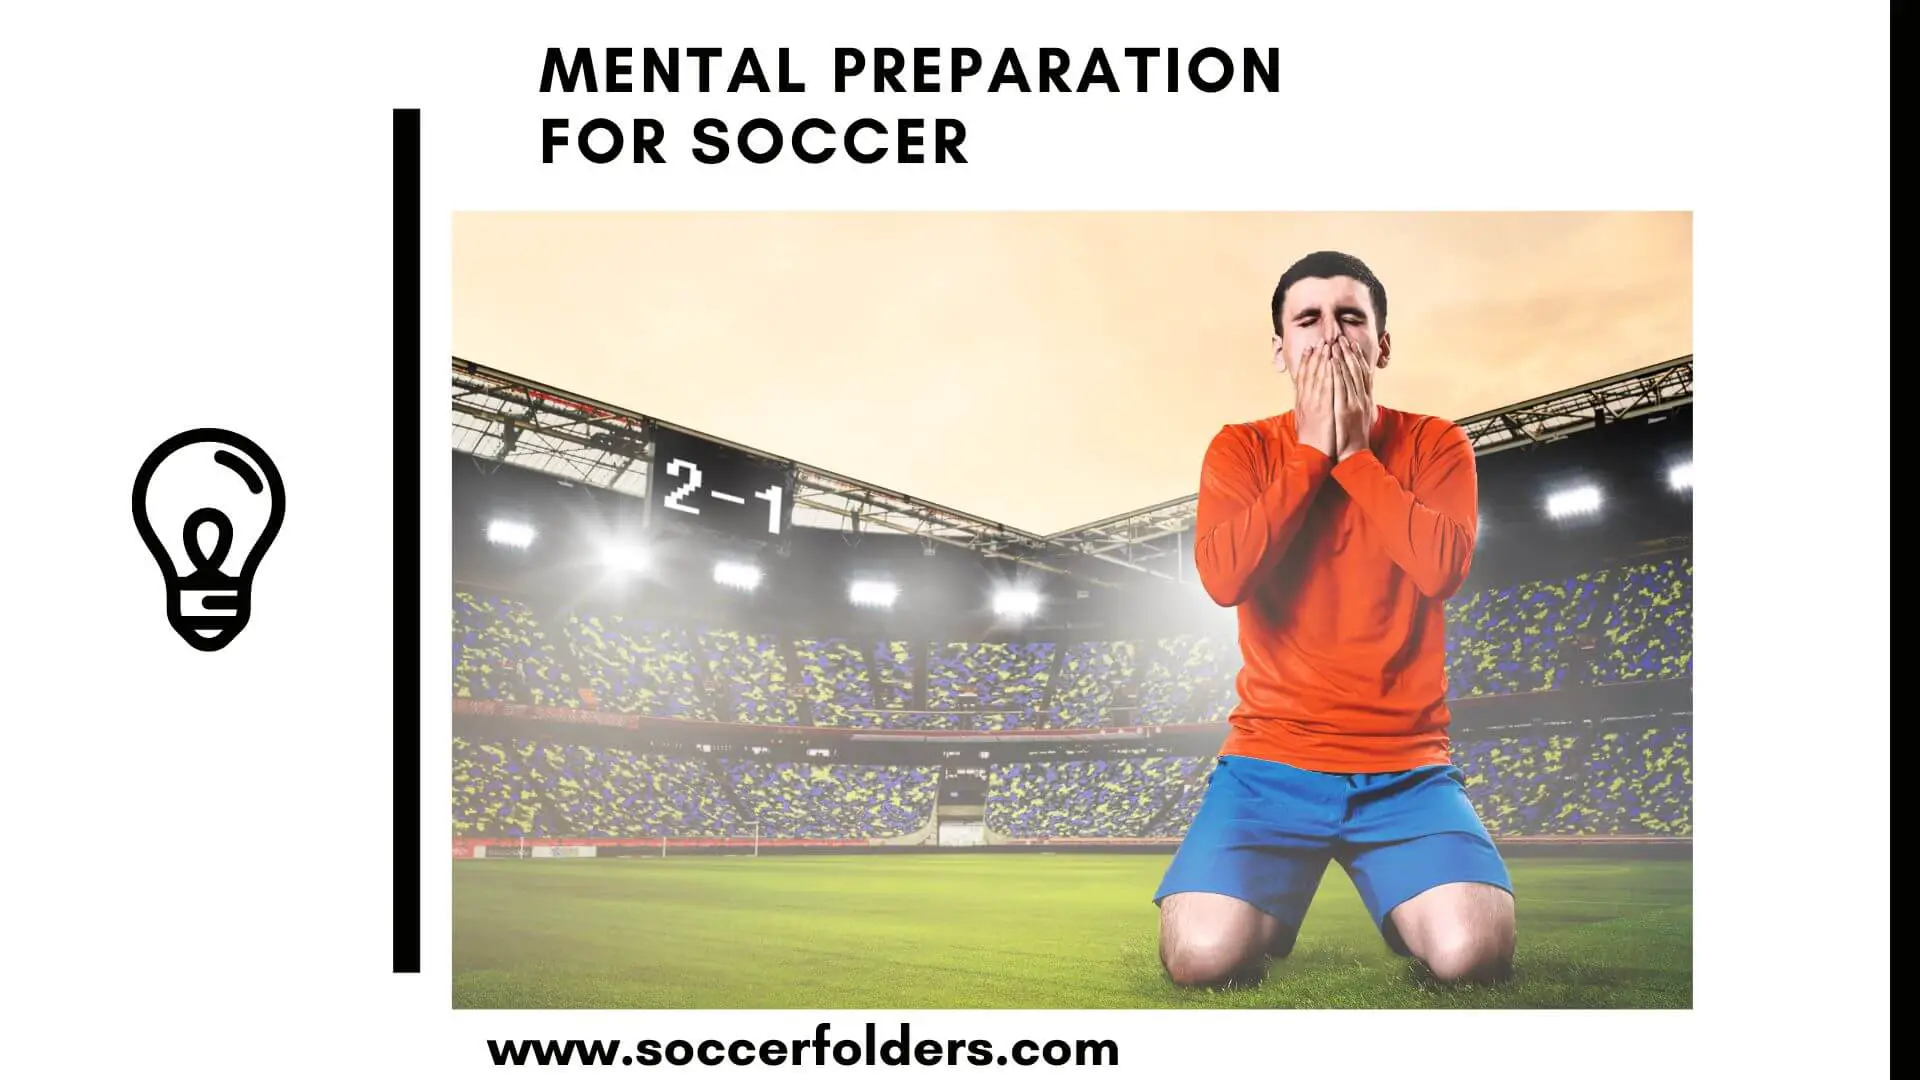 Mental preparation for soccer - Featured Image